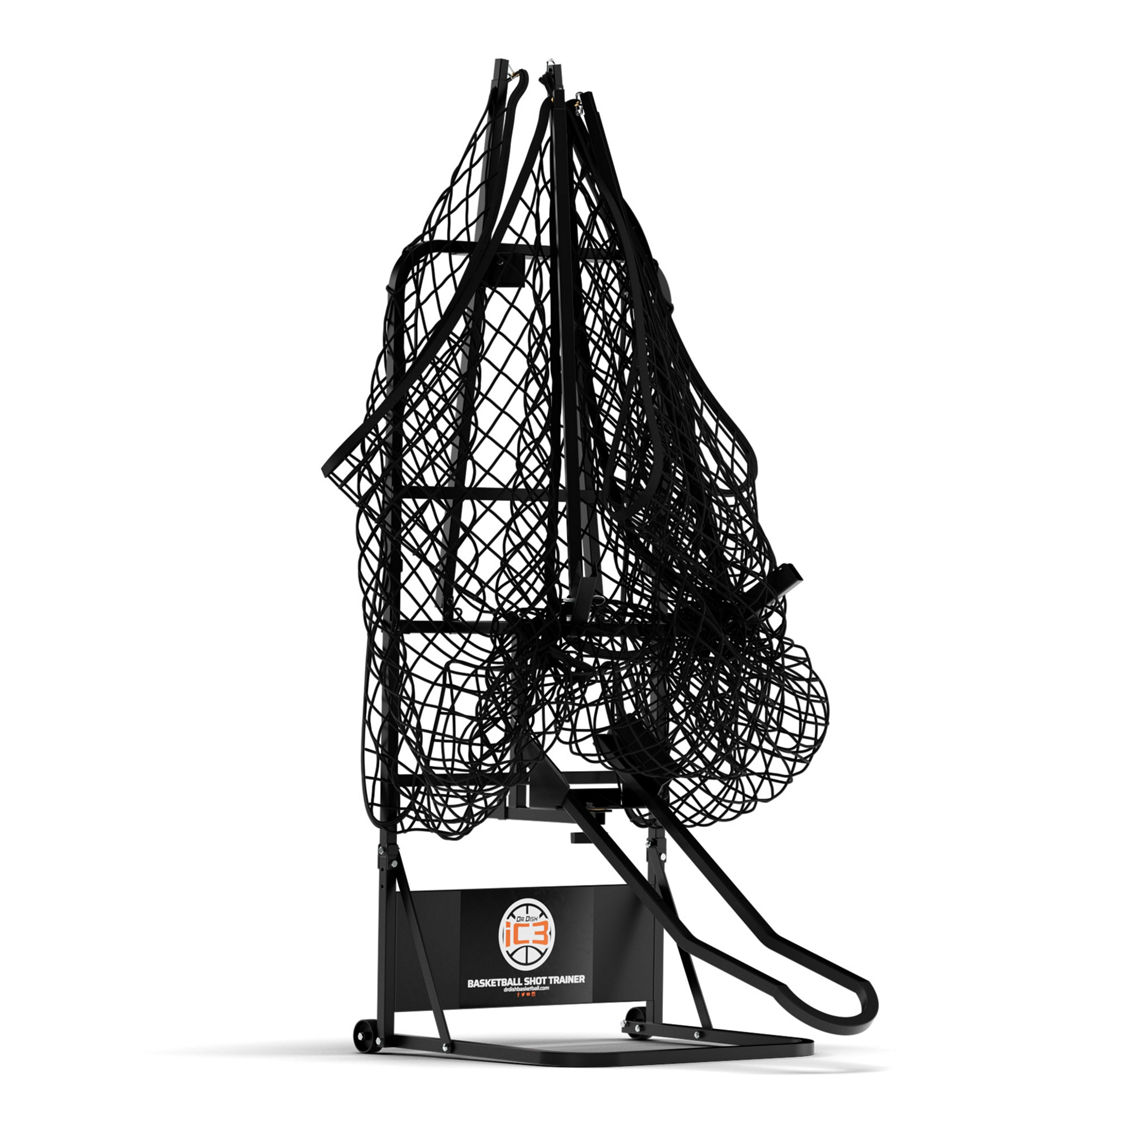 Dr. Dish IC3 Shot Trainer - Image 5 of 5